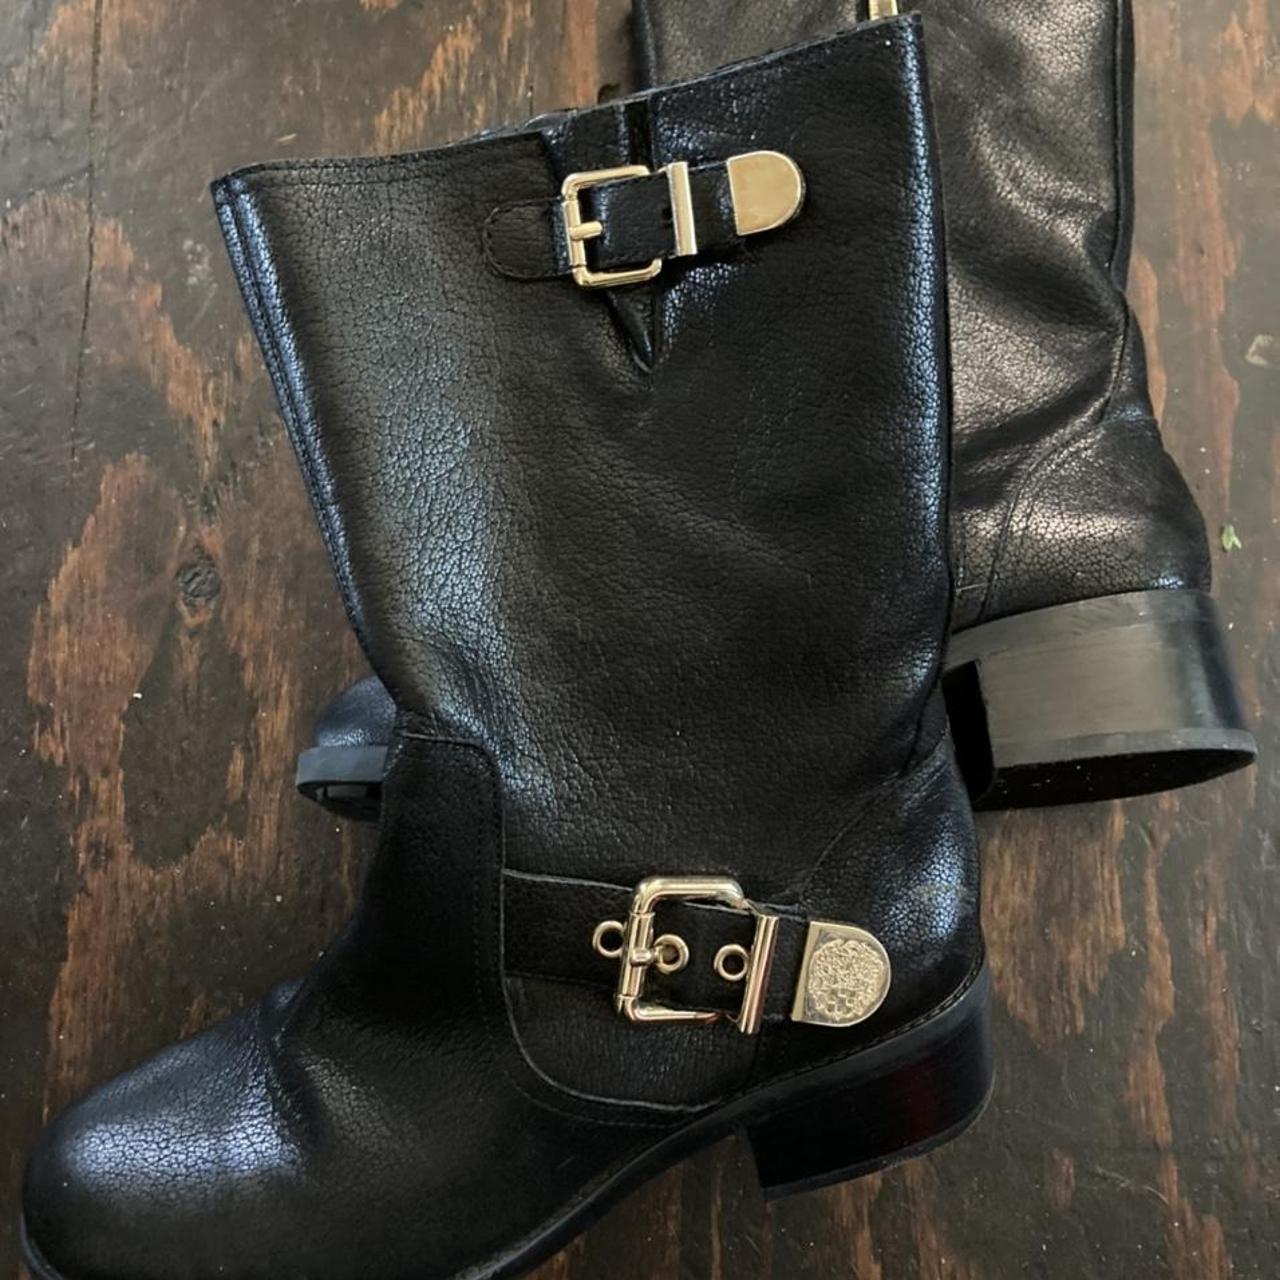 Vince Camuto Women's Black and Gold Boots | Depop